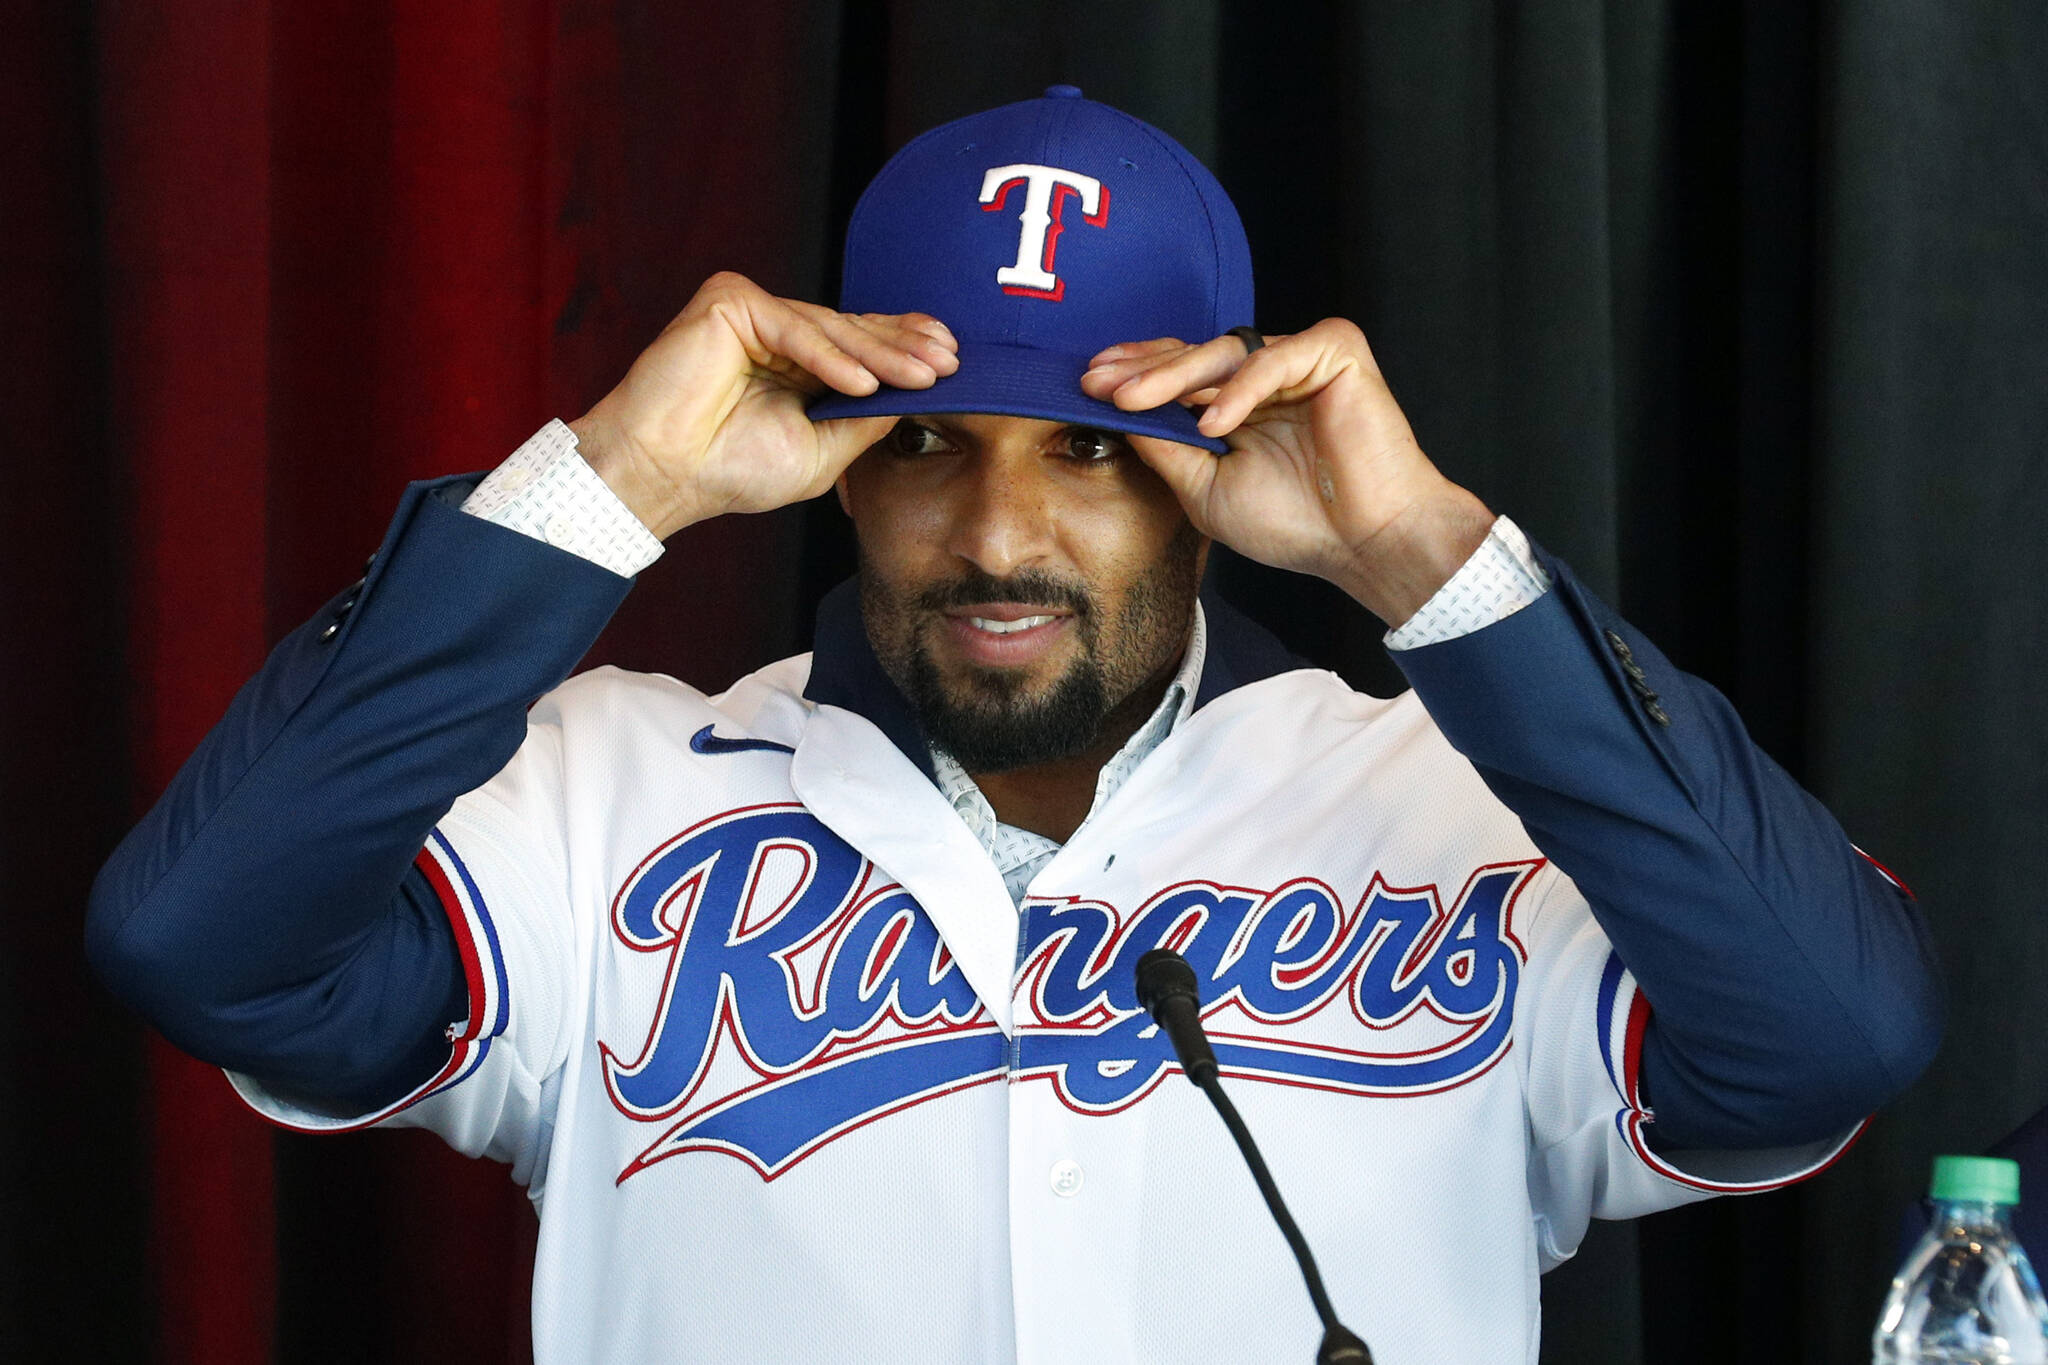 New Texas Rangers infielder Marcus Semien adjusts his hat as he gets ready to answer questions at a press conference at Globe Life Field Wednesday, Dec. 1, 2021, in Arlington, Texas. (AP Photo/Richard W. Rodriguez)